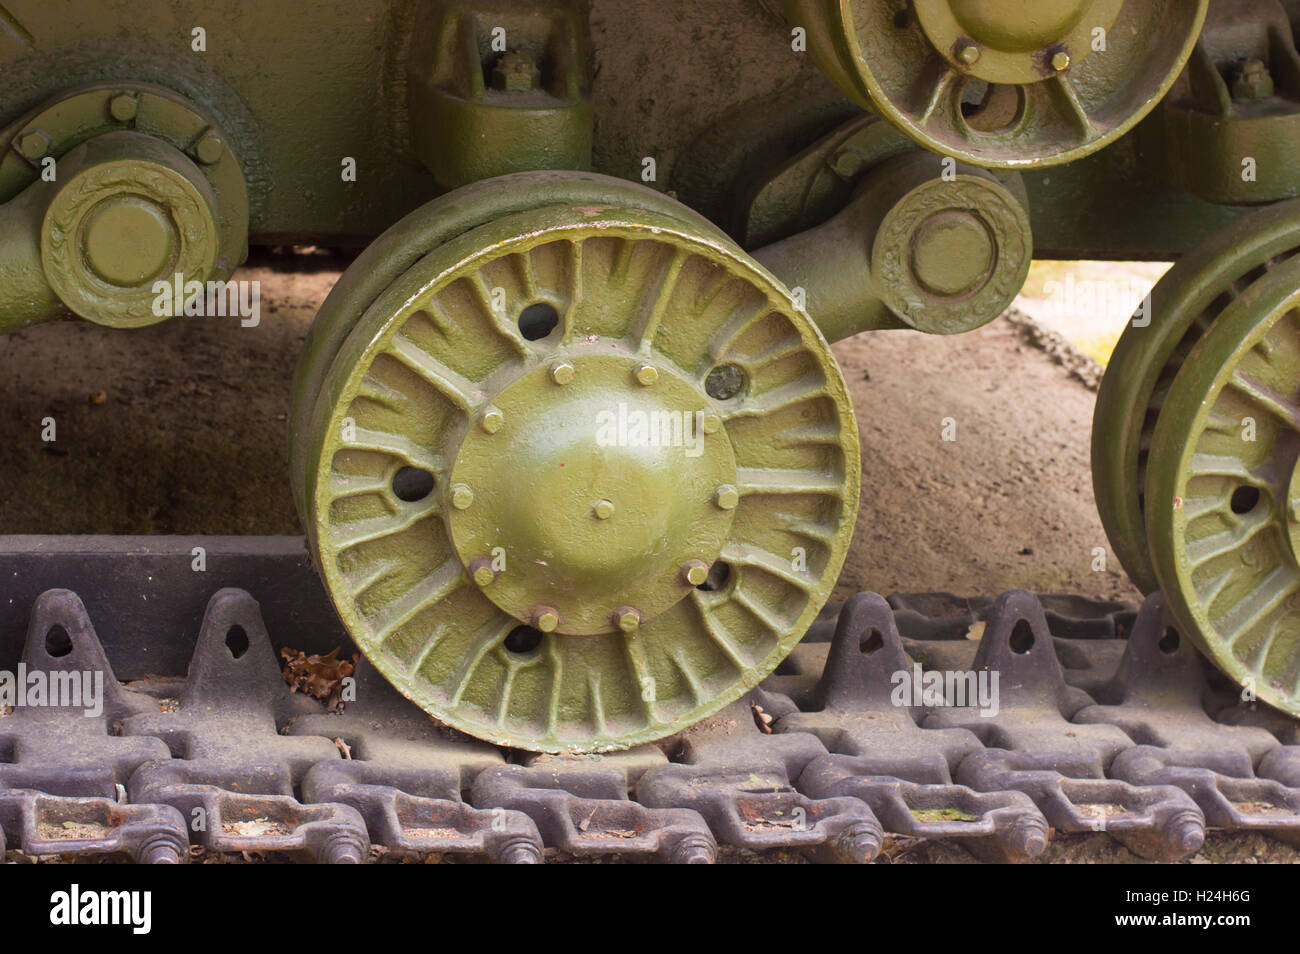 Detail of WWII Military Tank Caterpillar Close up Stock Photo